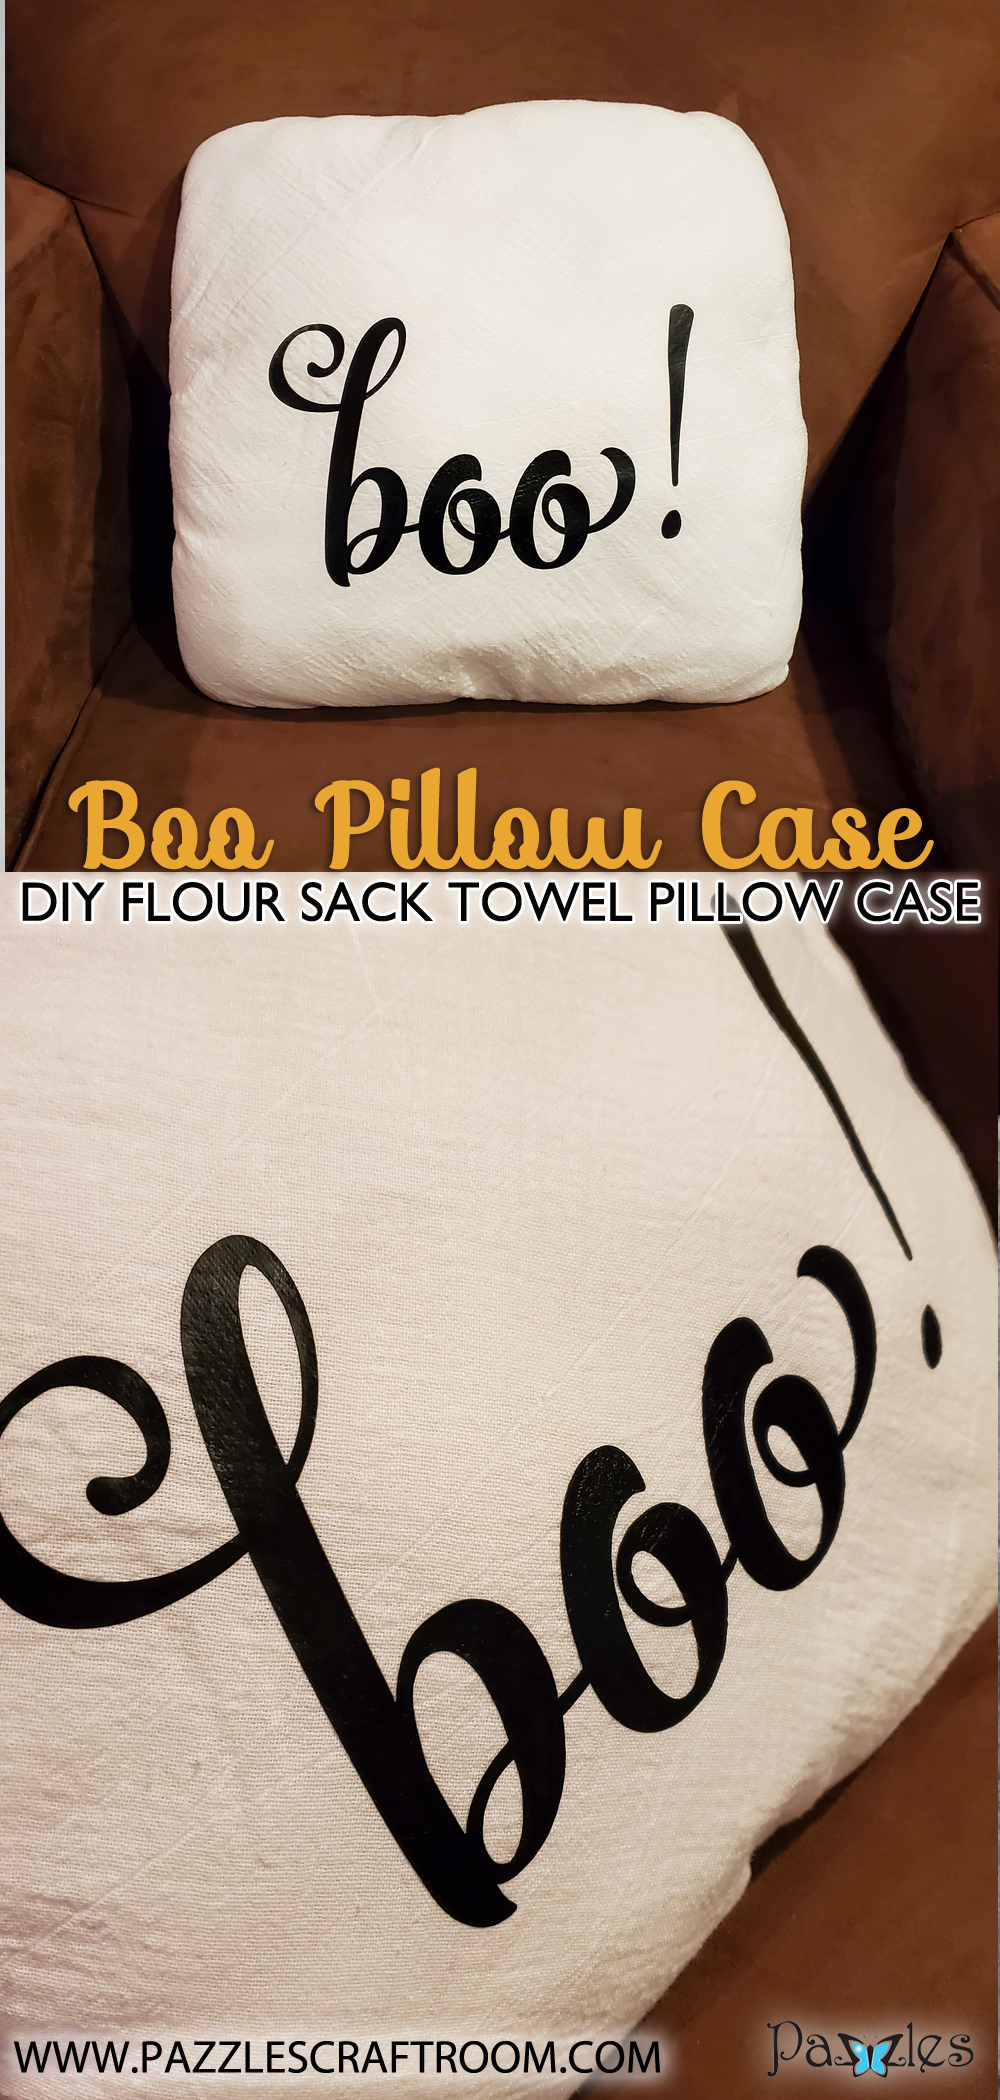 Pazzles DIY Boo Flour Sack Towel Pillow Cover with instant SVG download. Compatible with all major electronic cutters including Pazzles Inspiration, Cricut, and Silhouette Cameo. Design by Renee Smart.